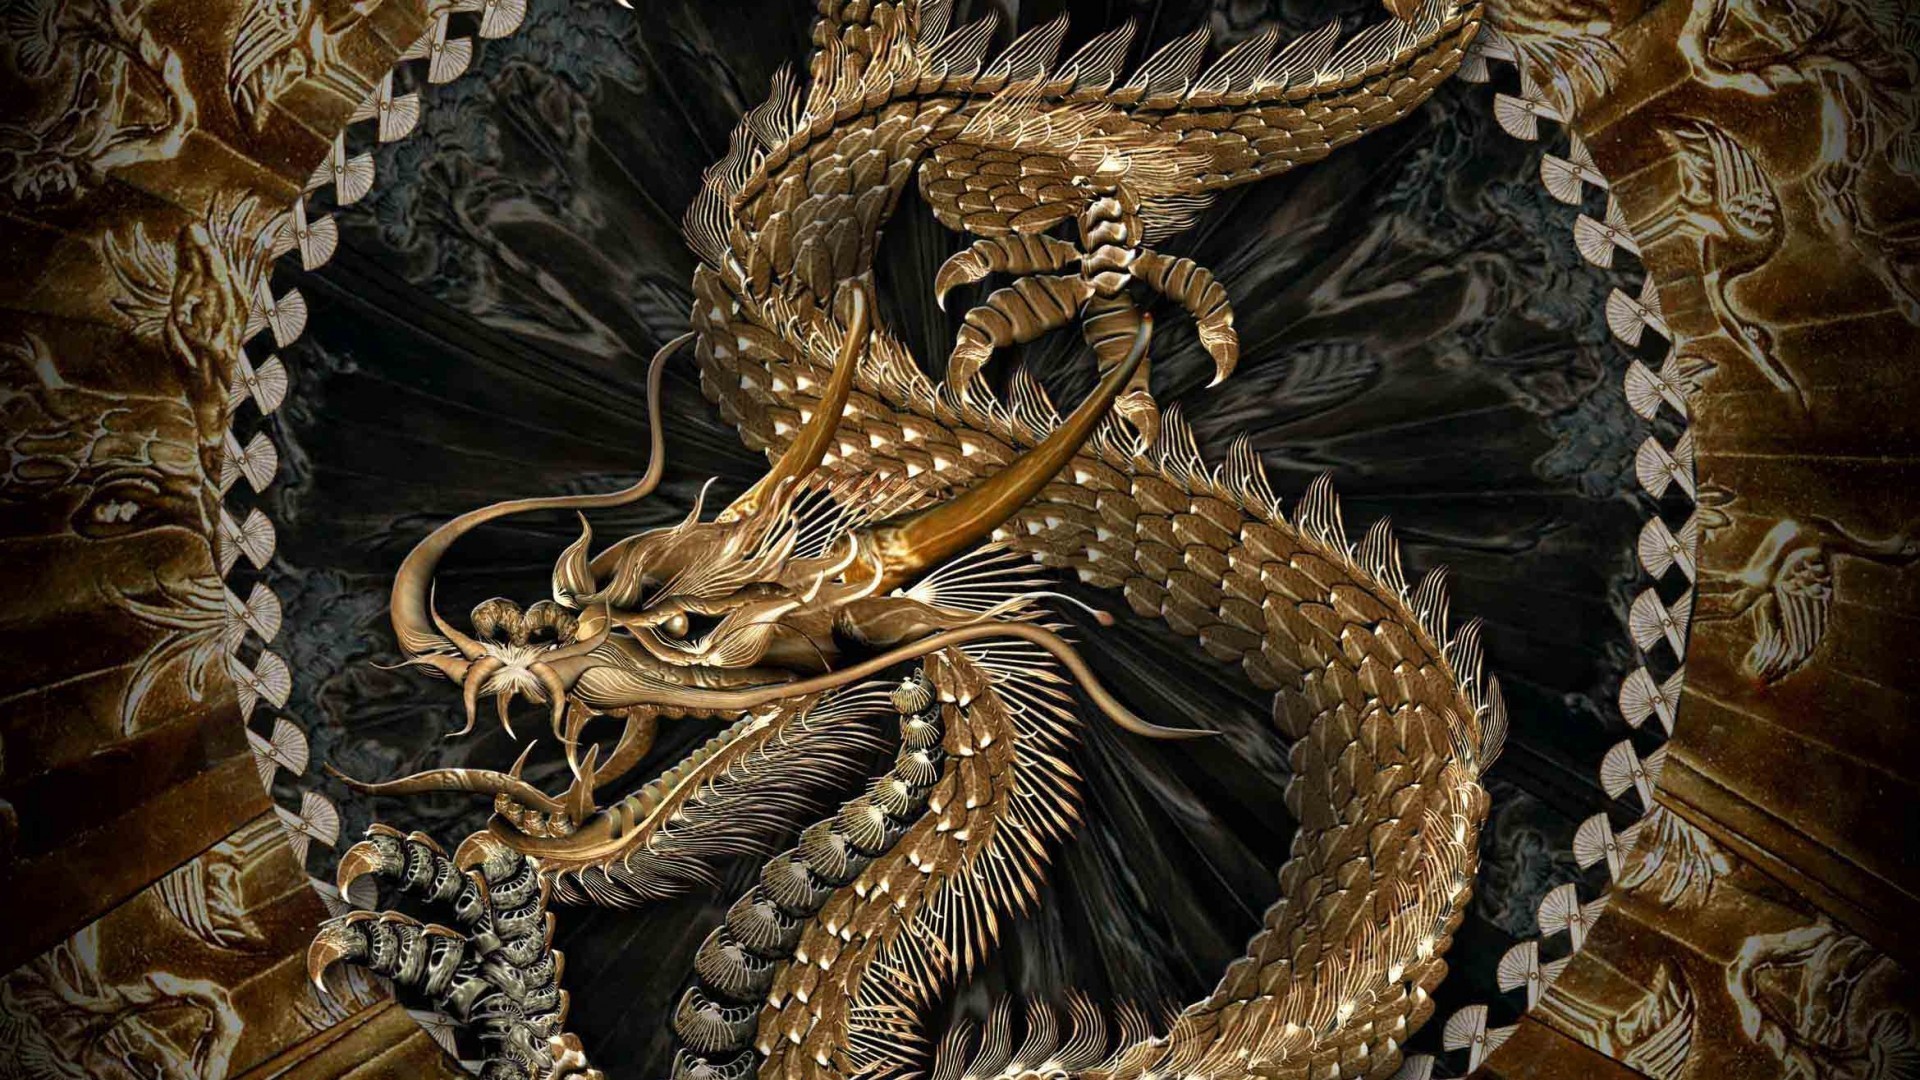 1920x1080 Dragon IPhone Wallpapers Pack Dragon Wallpaper IPhone | HD Wallpapers |  Pinterest | Japanese dragon, Dragons and Wallpaper